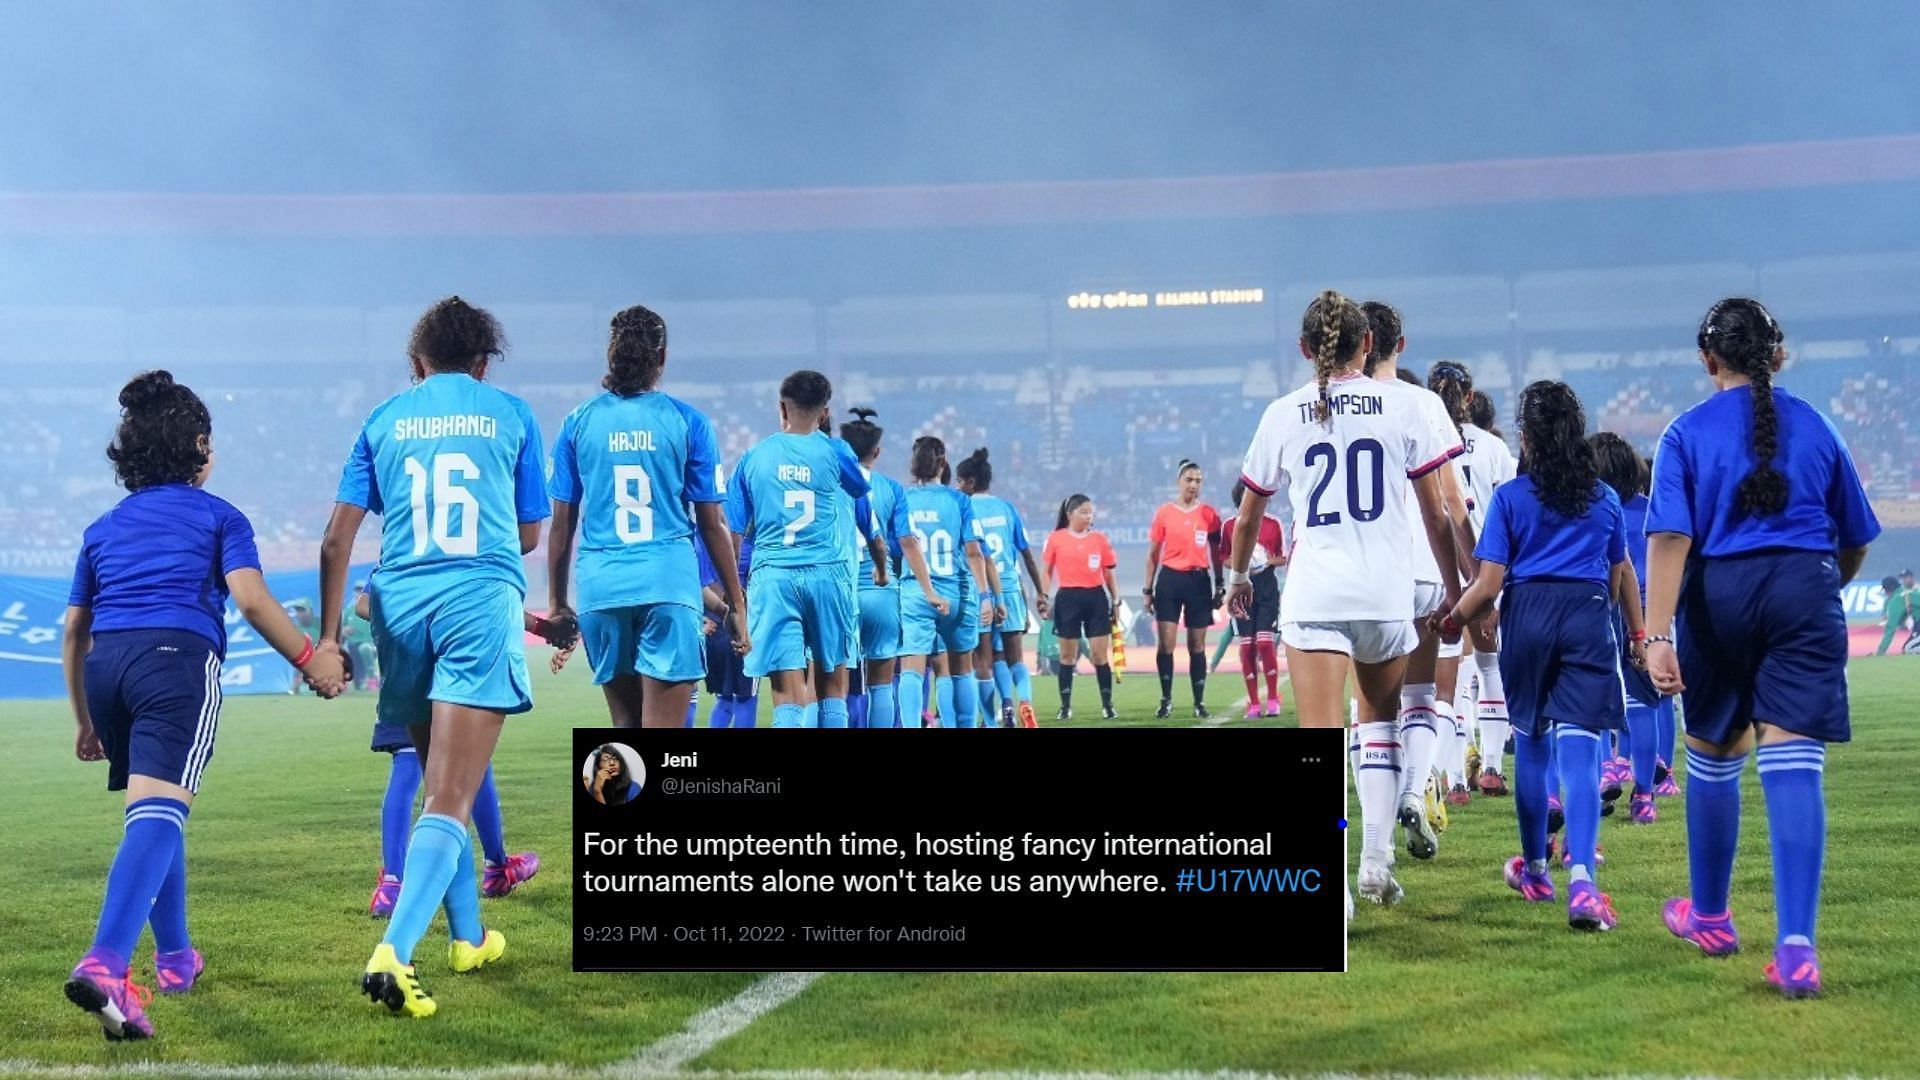 India suffered a humiliating 0-8 loss against USA.